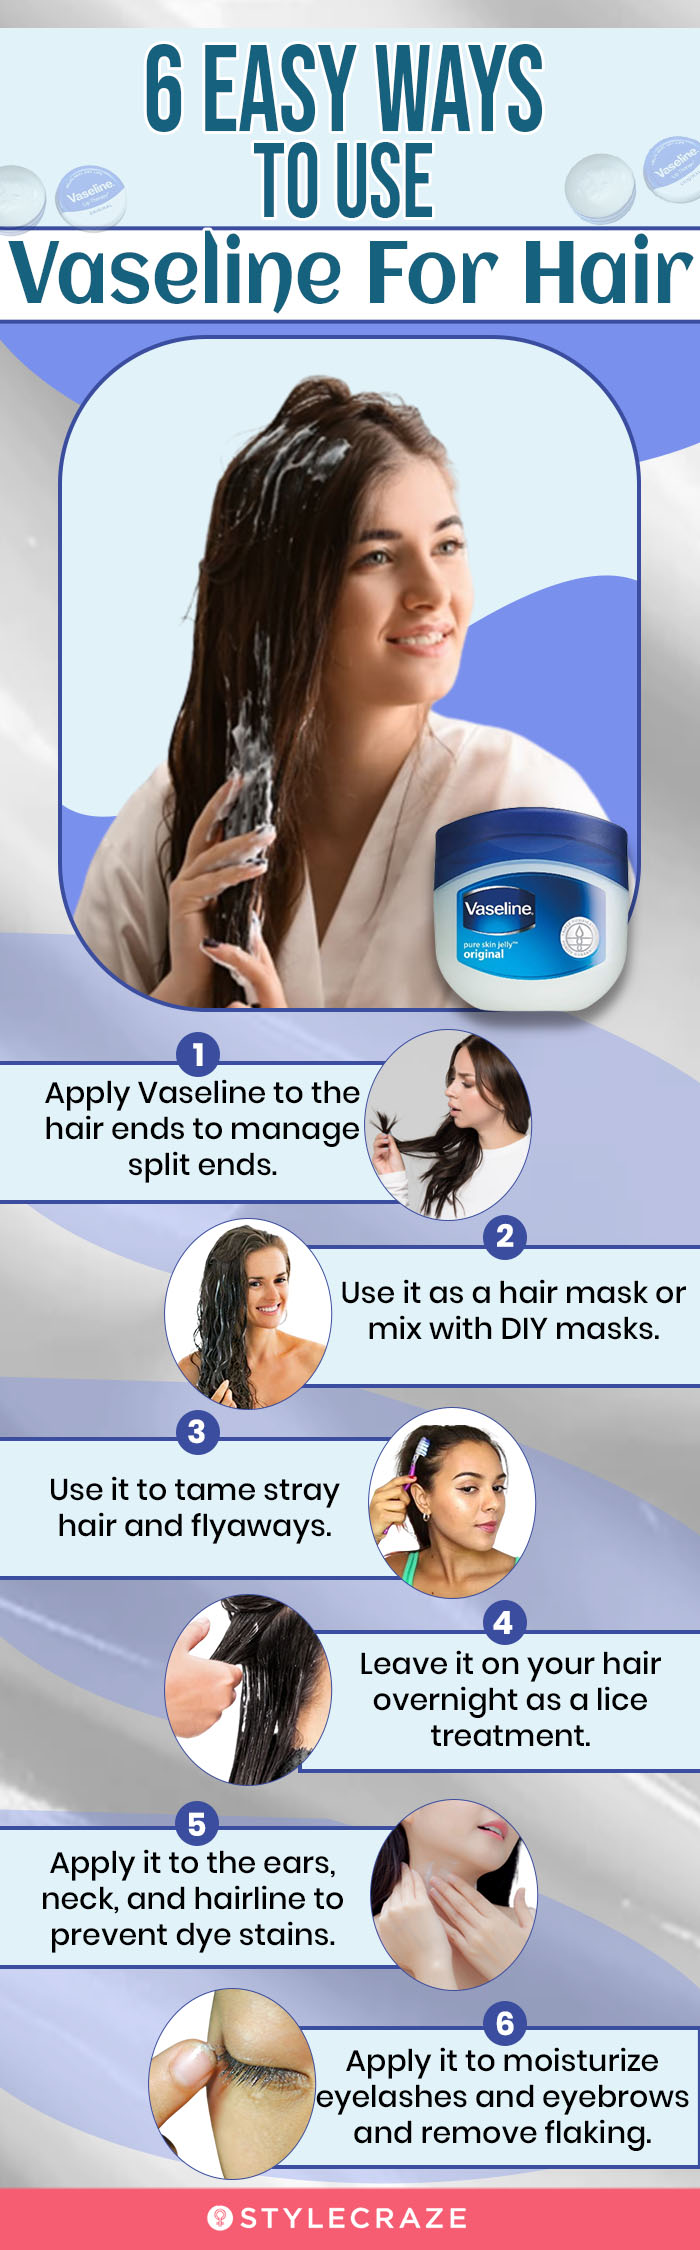 6 easy ways to use vaseline for hair [infographic]